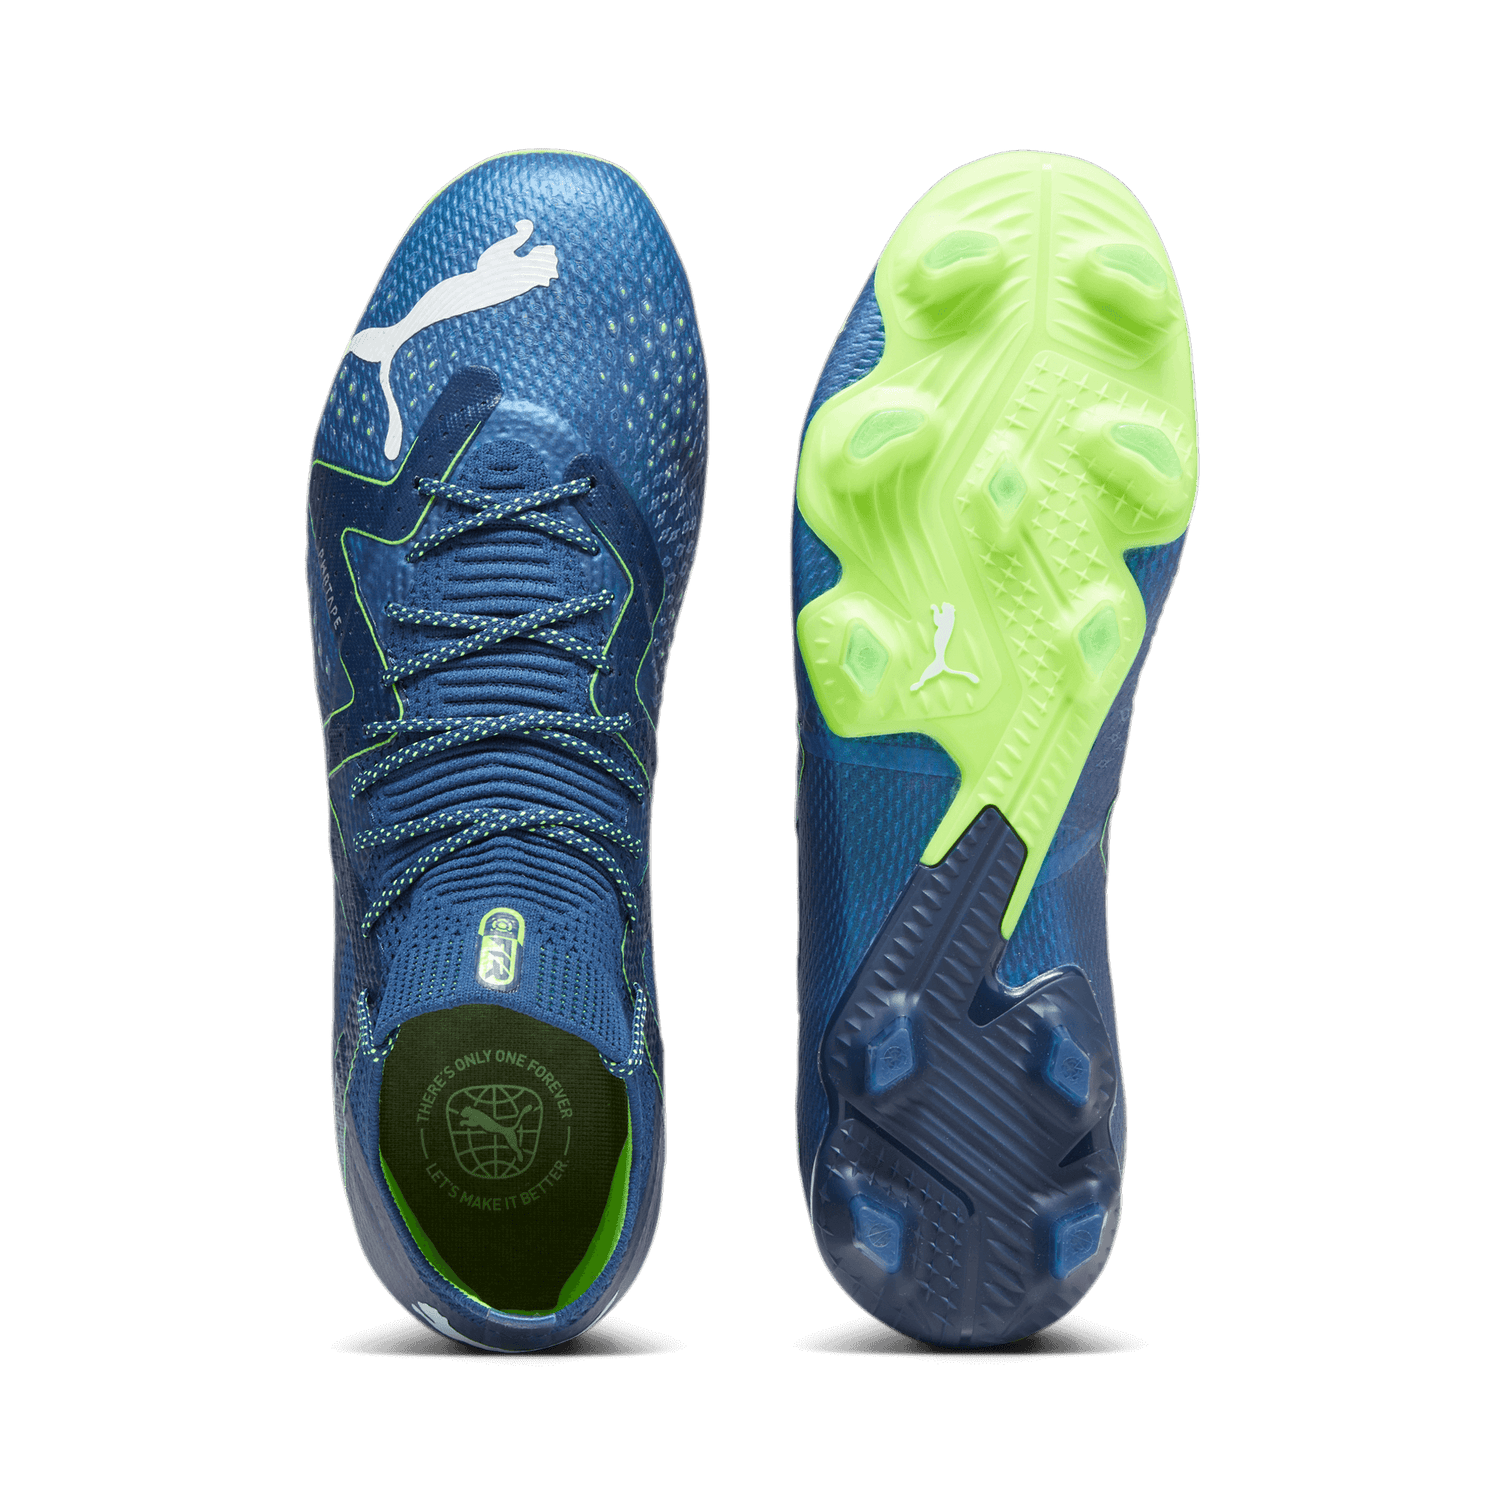 Pumas Future Ultimate FG-AG - Gear Up Pack (HO23) (Pair - Top and Bottom)